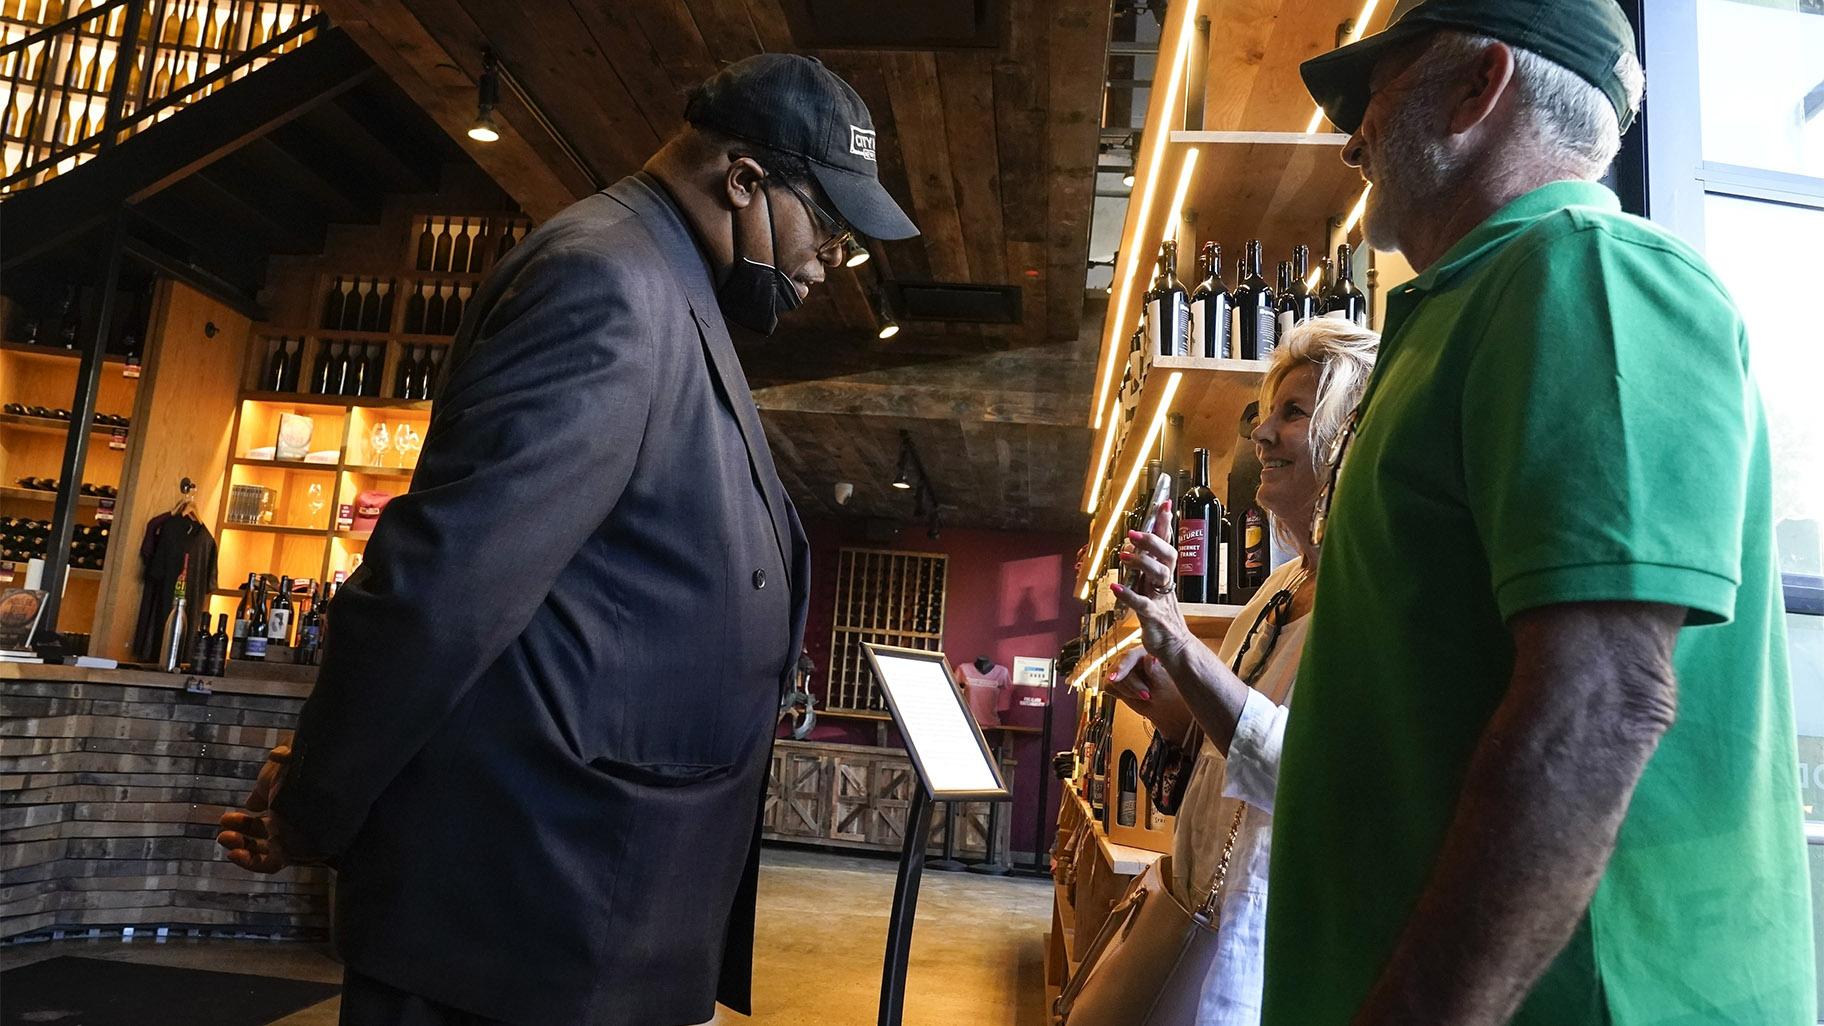 Security personnel ask customers for proof of vaccination as they enter City Winery, Thursday, June 24, 2021, in New York. (AP Photo / Frank Franklin II, File)